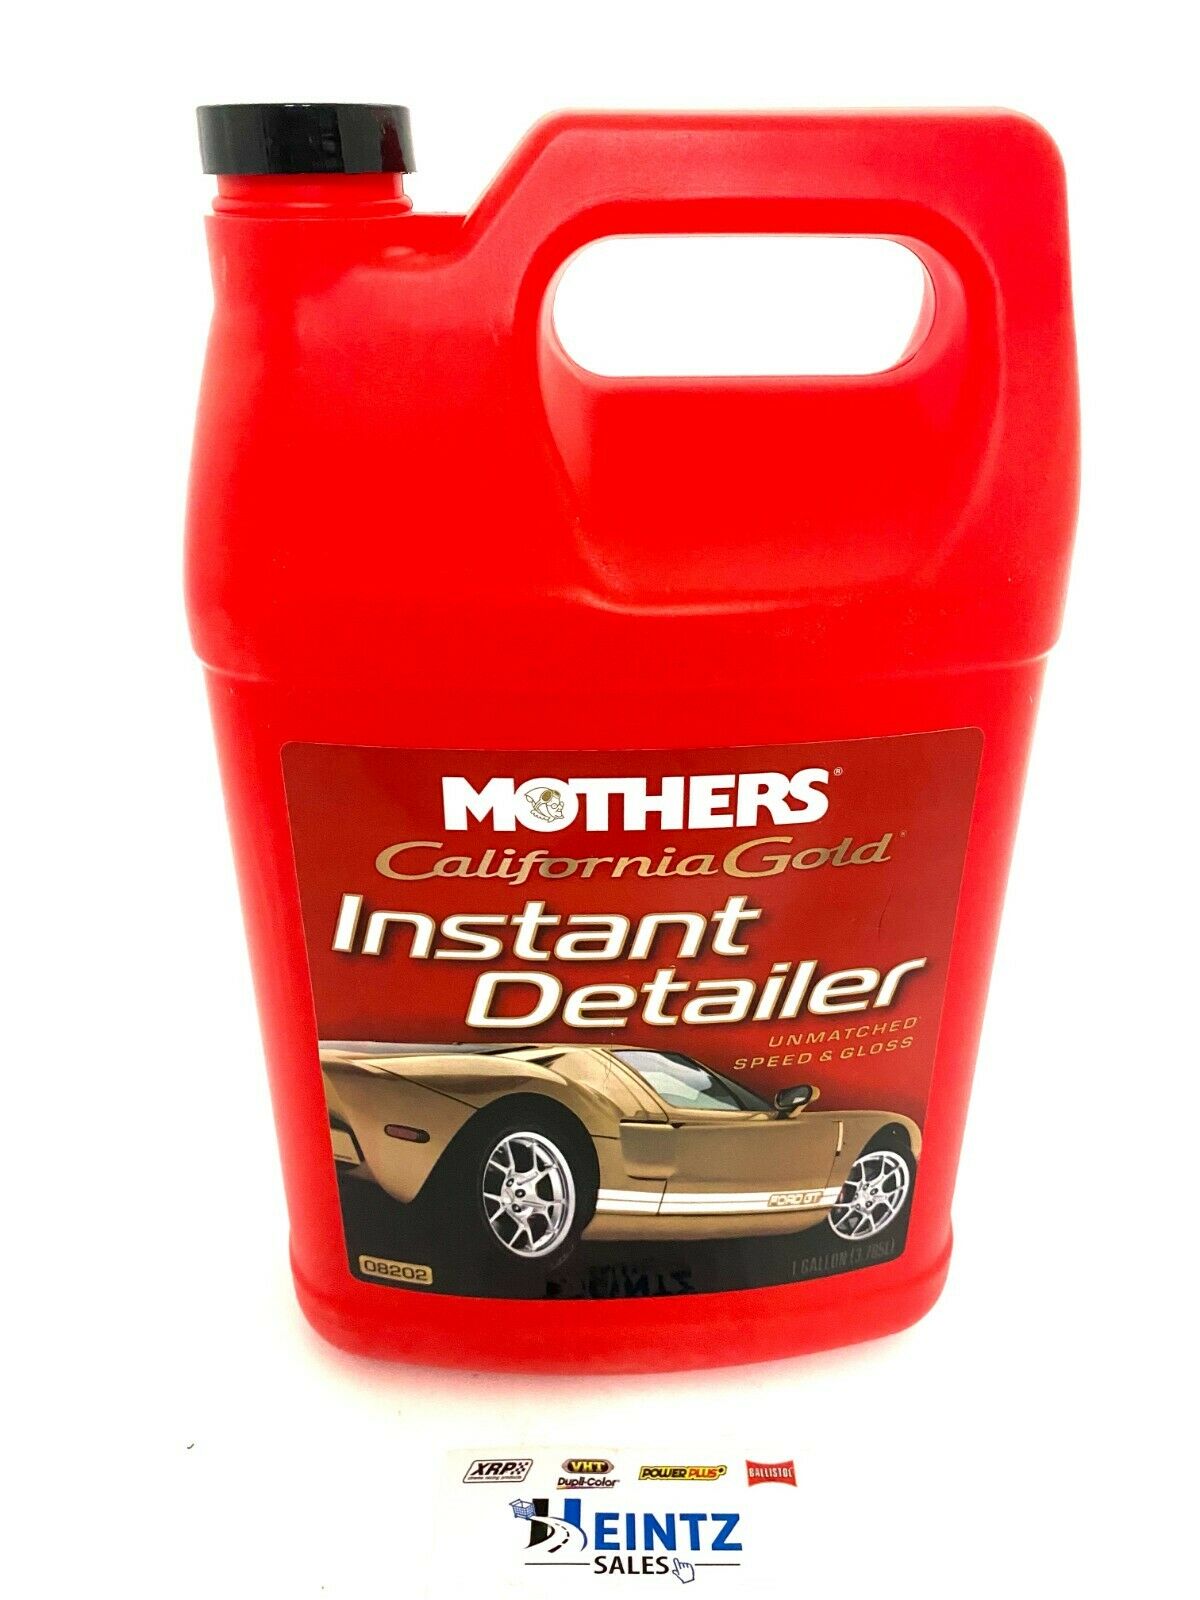 MOTHERS 08202 California Gold Instant Detailer Showtime - Unmatched Gloss - 1 gal.